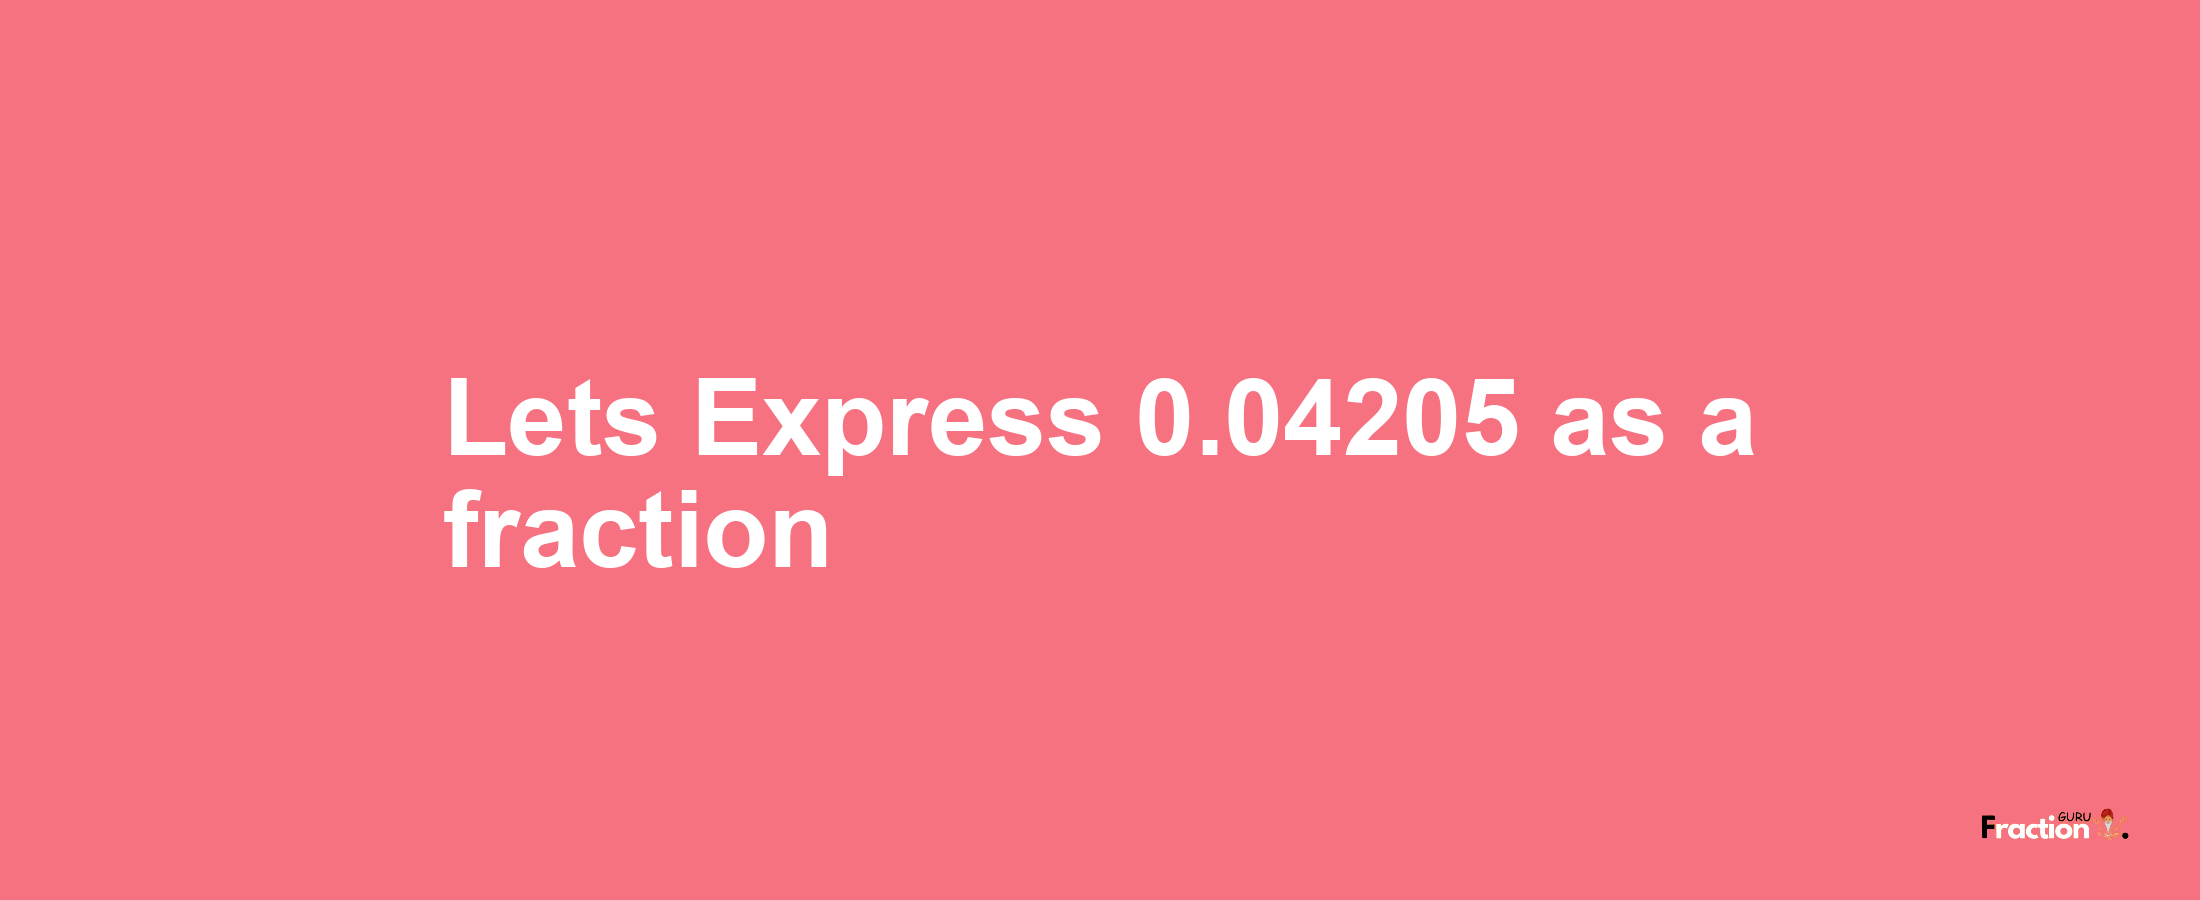 Lets Express 0.04205 as afraction